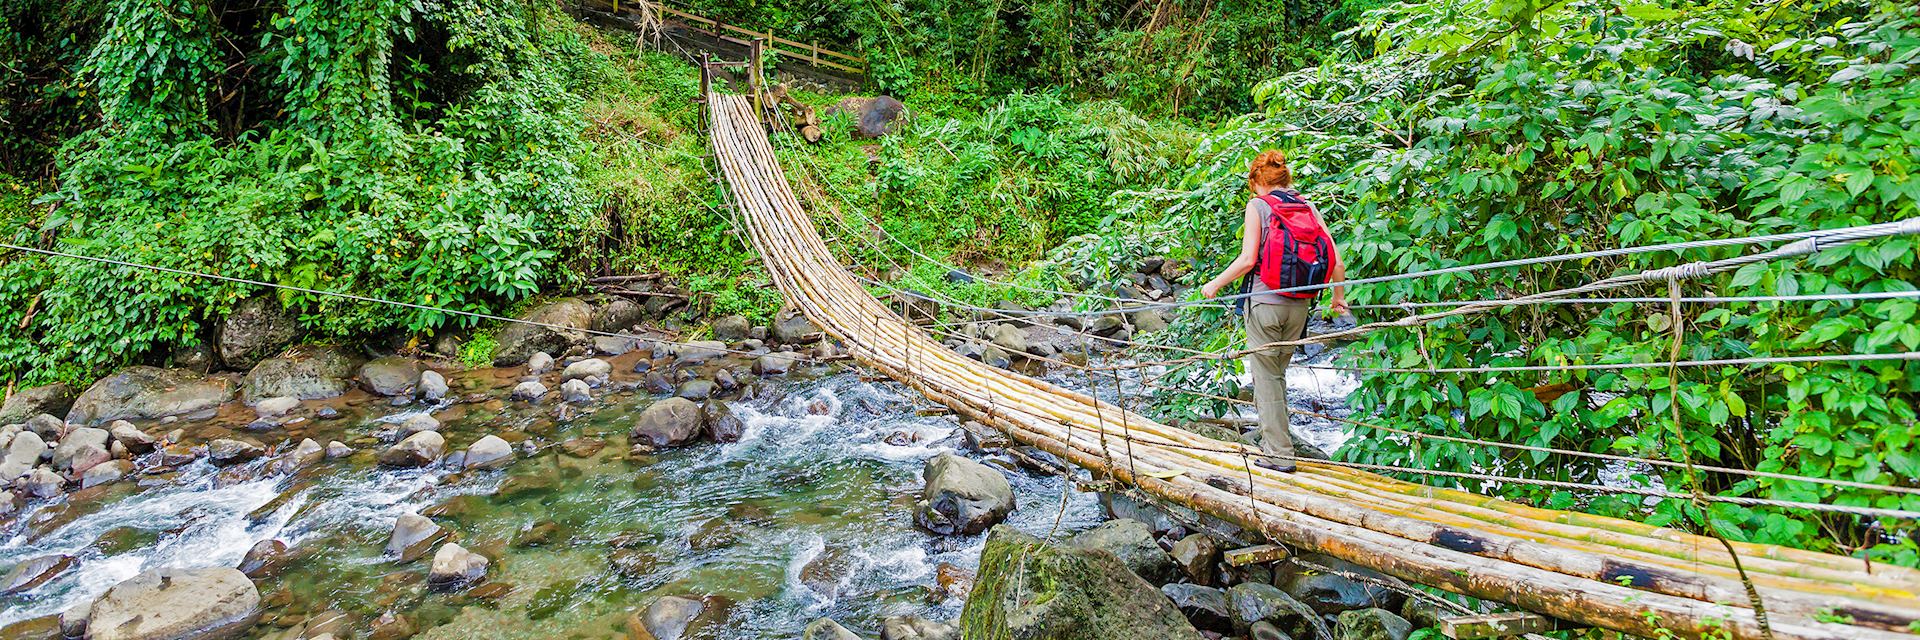 Crossing a bamboo bridge, St Vincent and the Grenadines